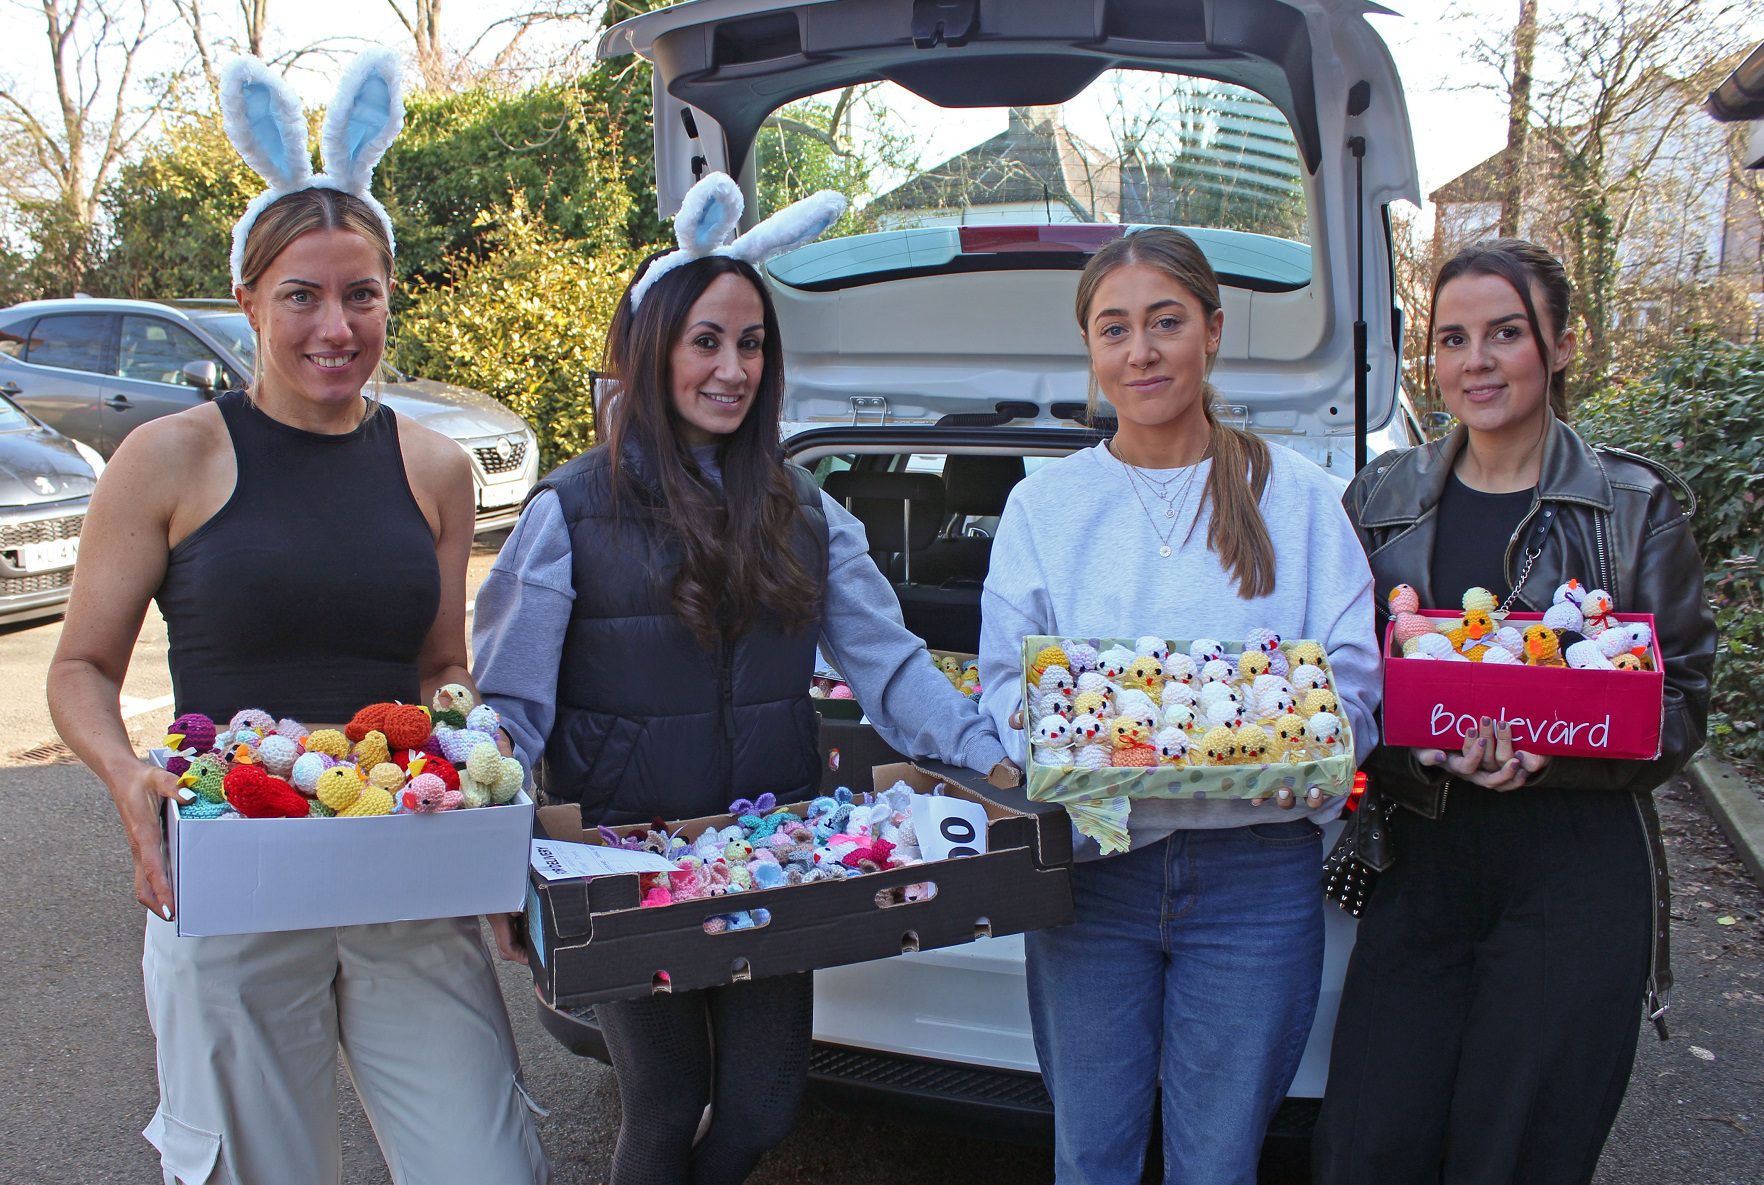 Four women holding boxes of knitted chicks stood in front of a white car with the boot open